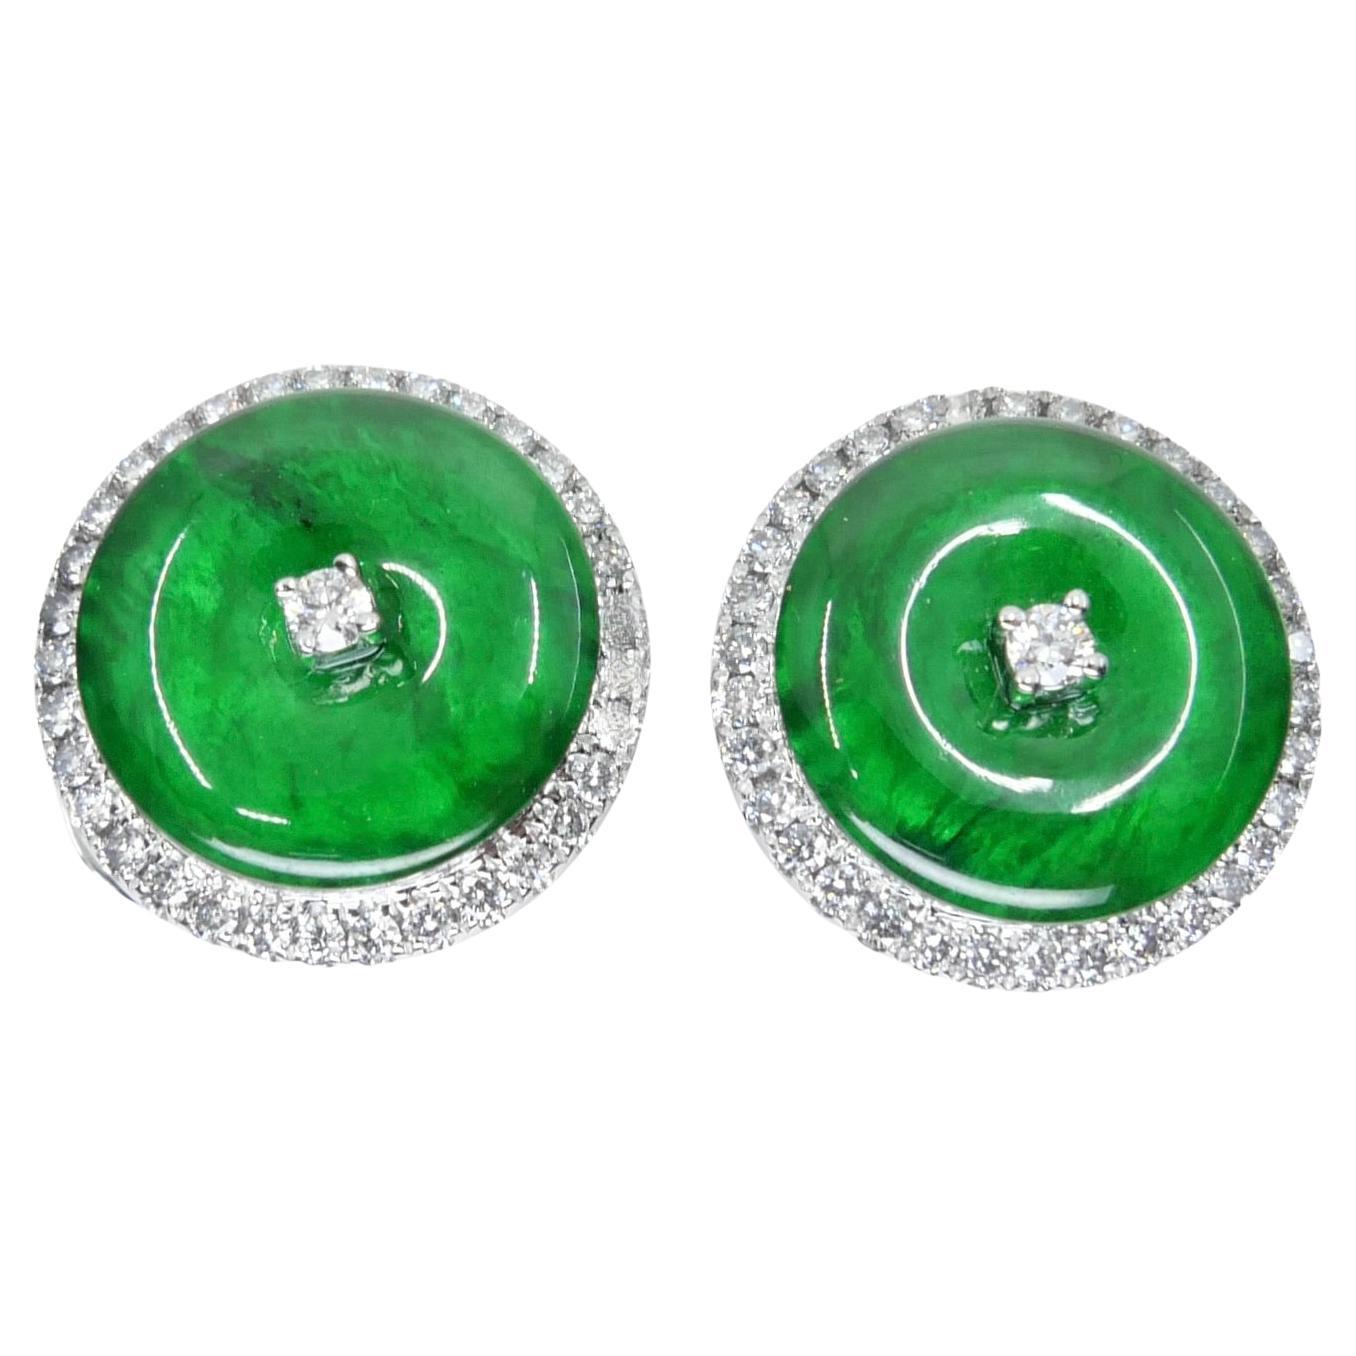 Certified Natural Type A Jadeite Jade And Diamond Earrings. Apple Green Color For Sale